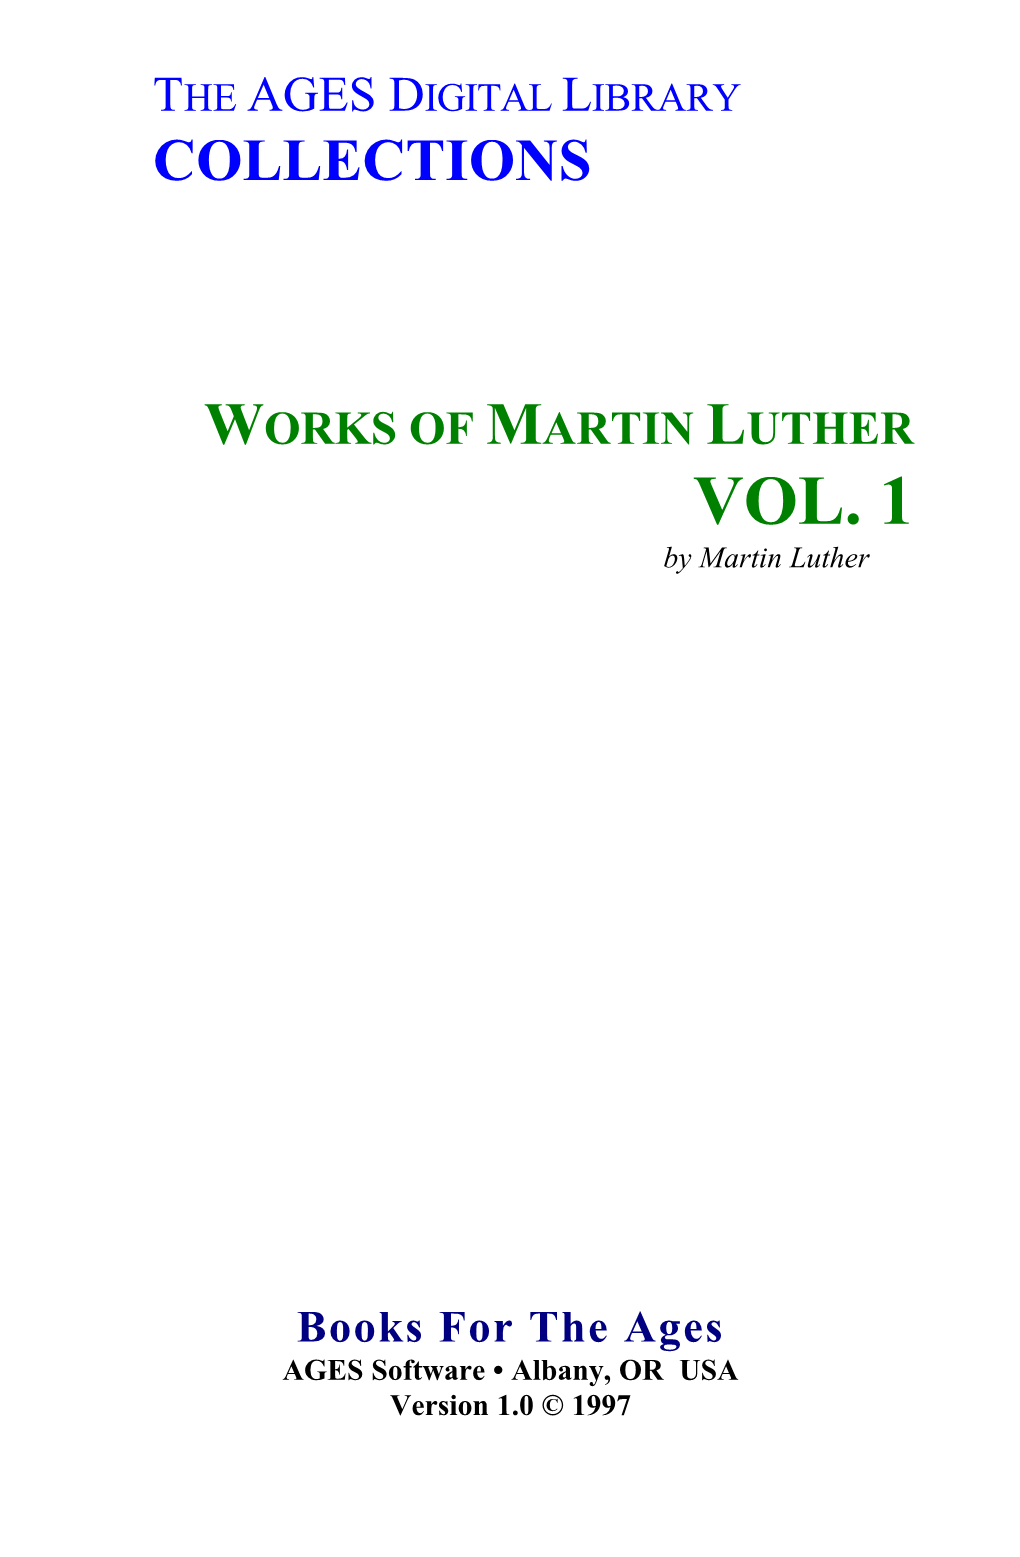 WORKS of MARTIN LUTHER VOL. 1 by Martin Luther